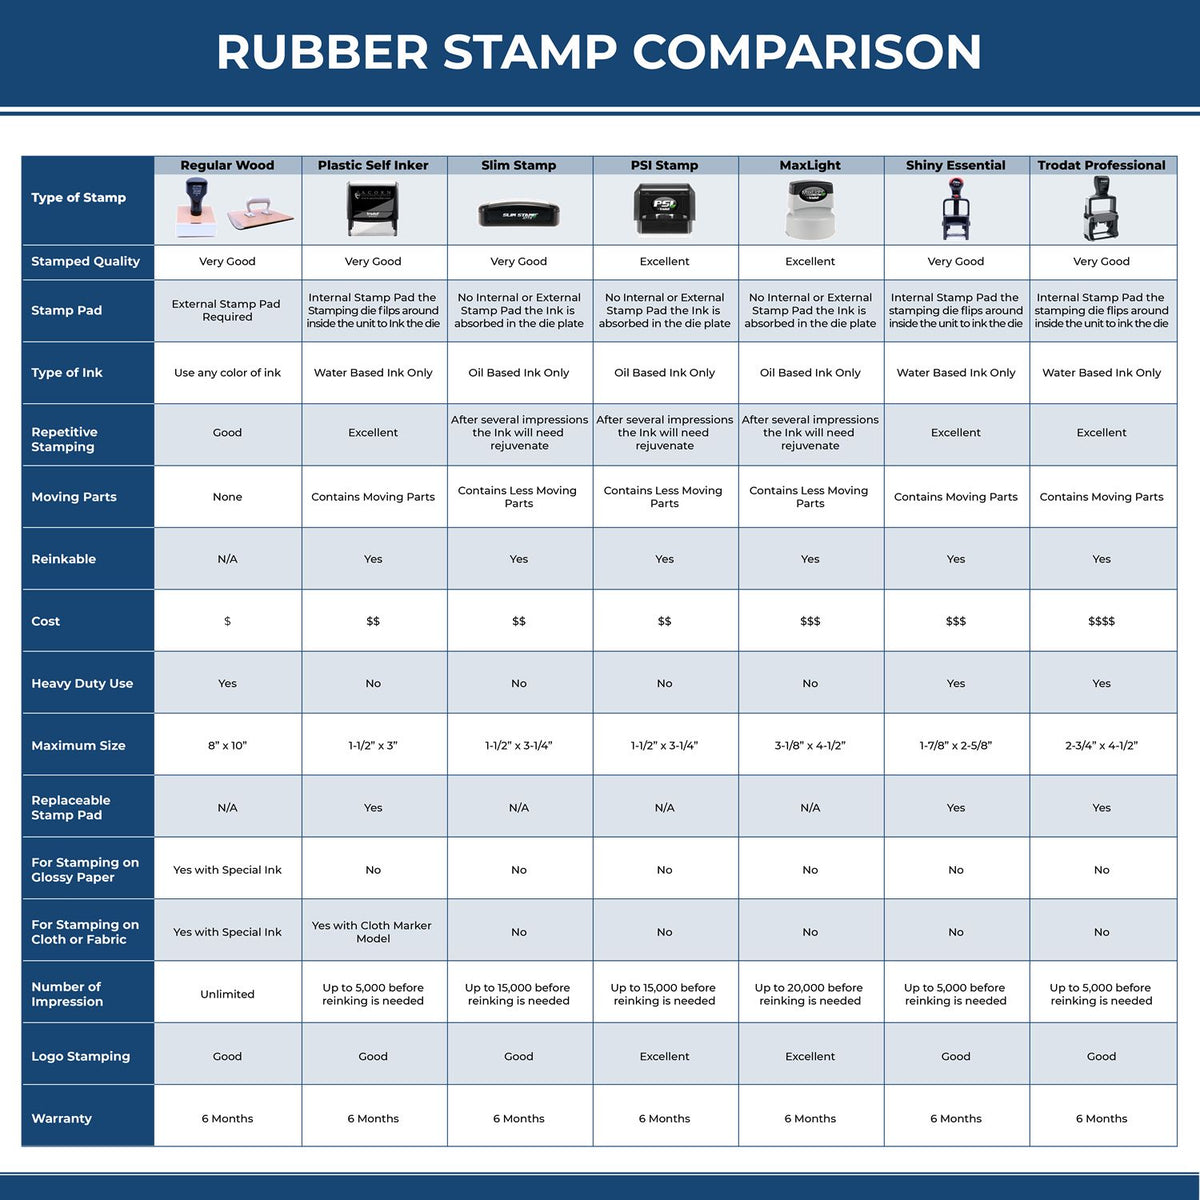 Large Self-Inking Contado Stamp 5525S Rubber Stamp Comparison